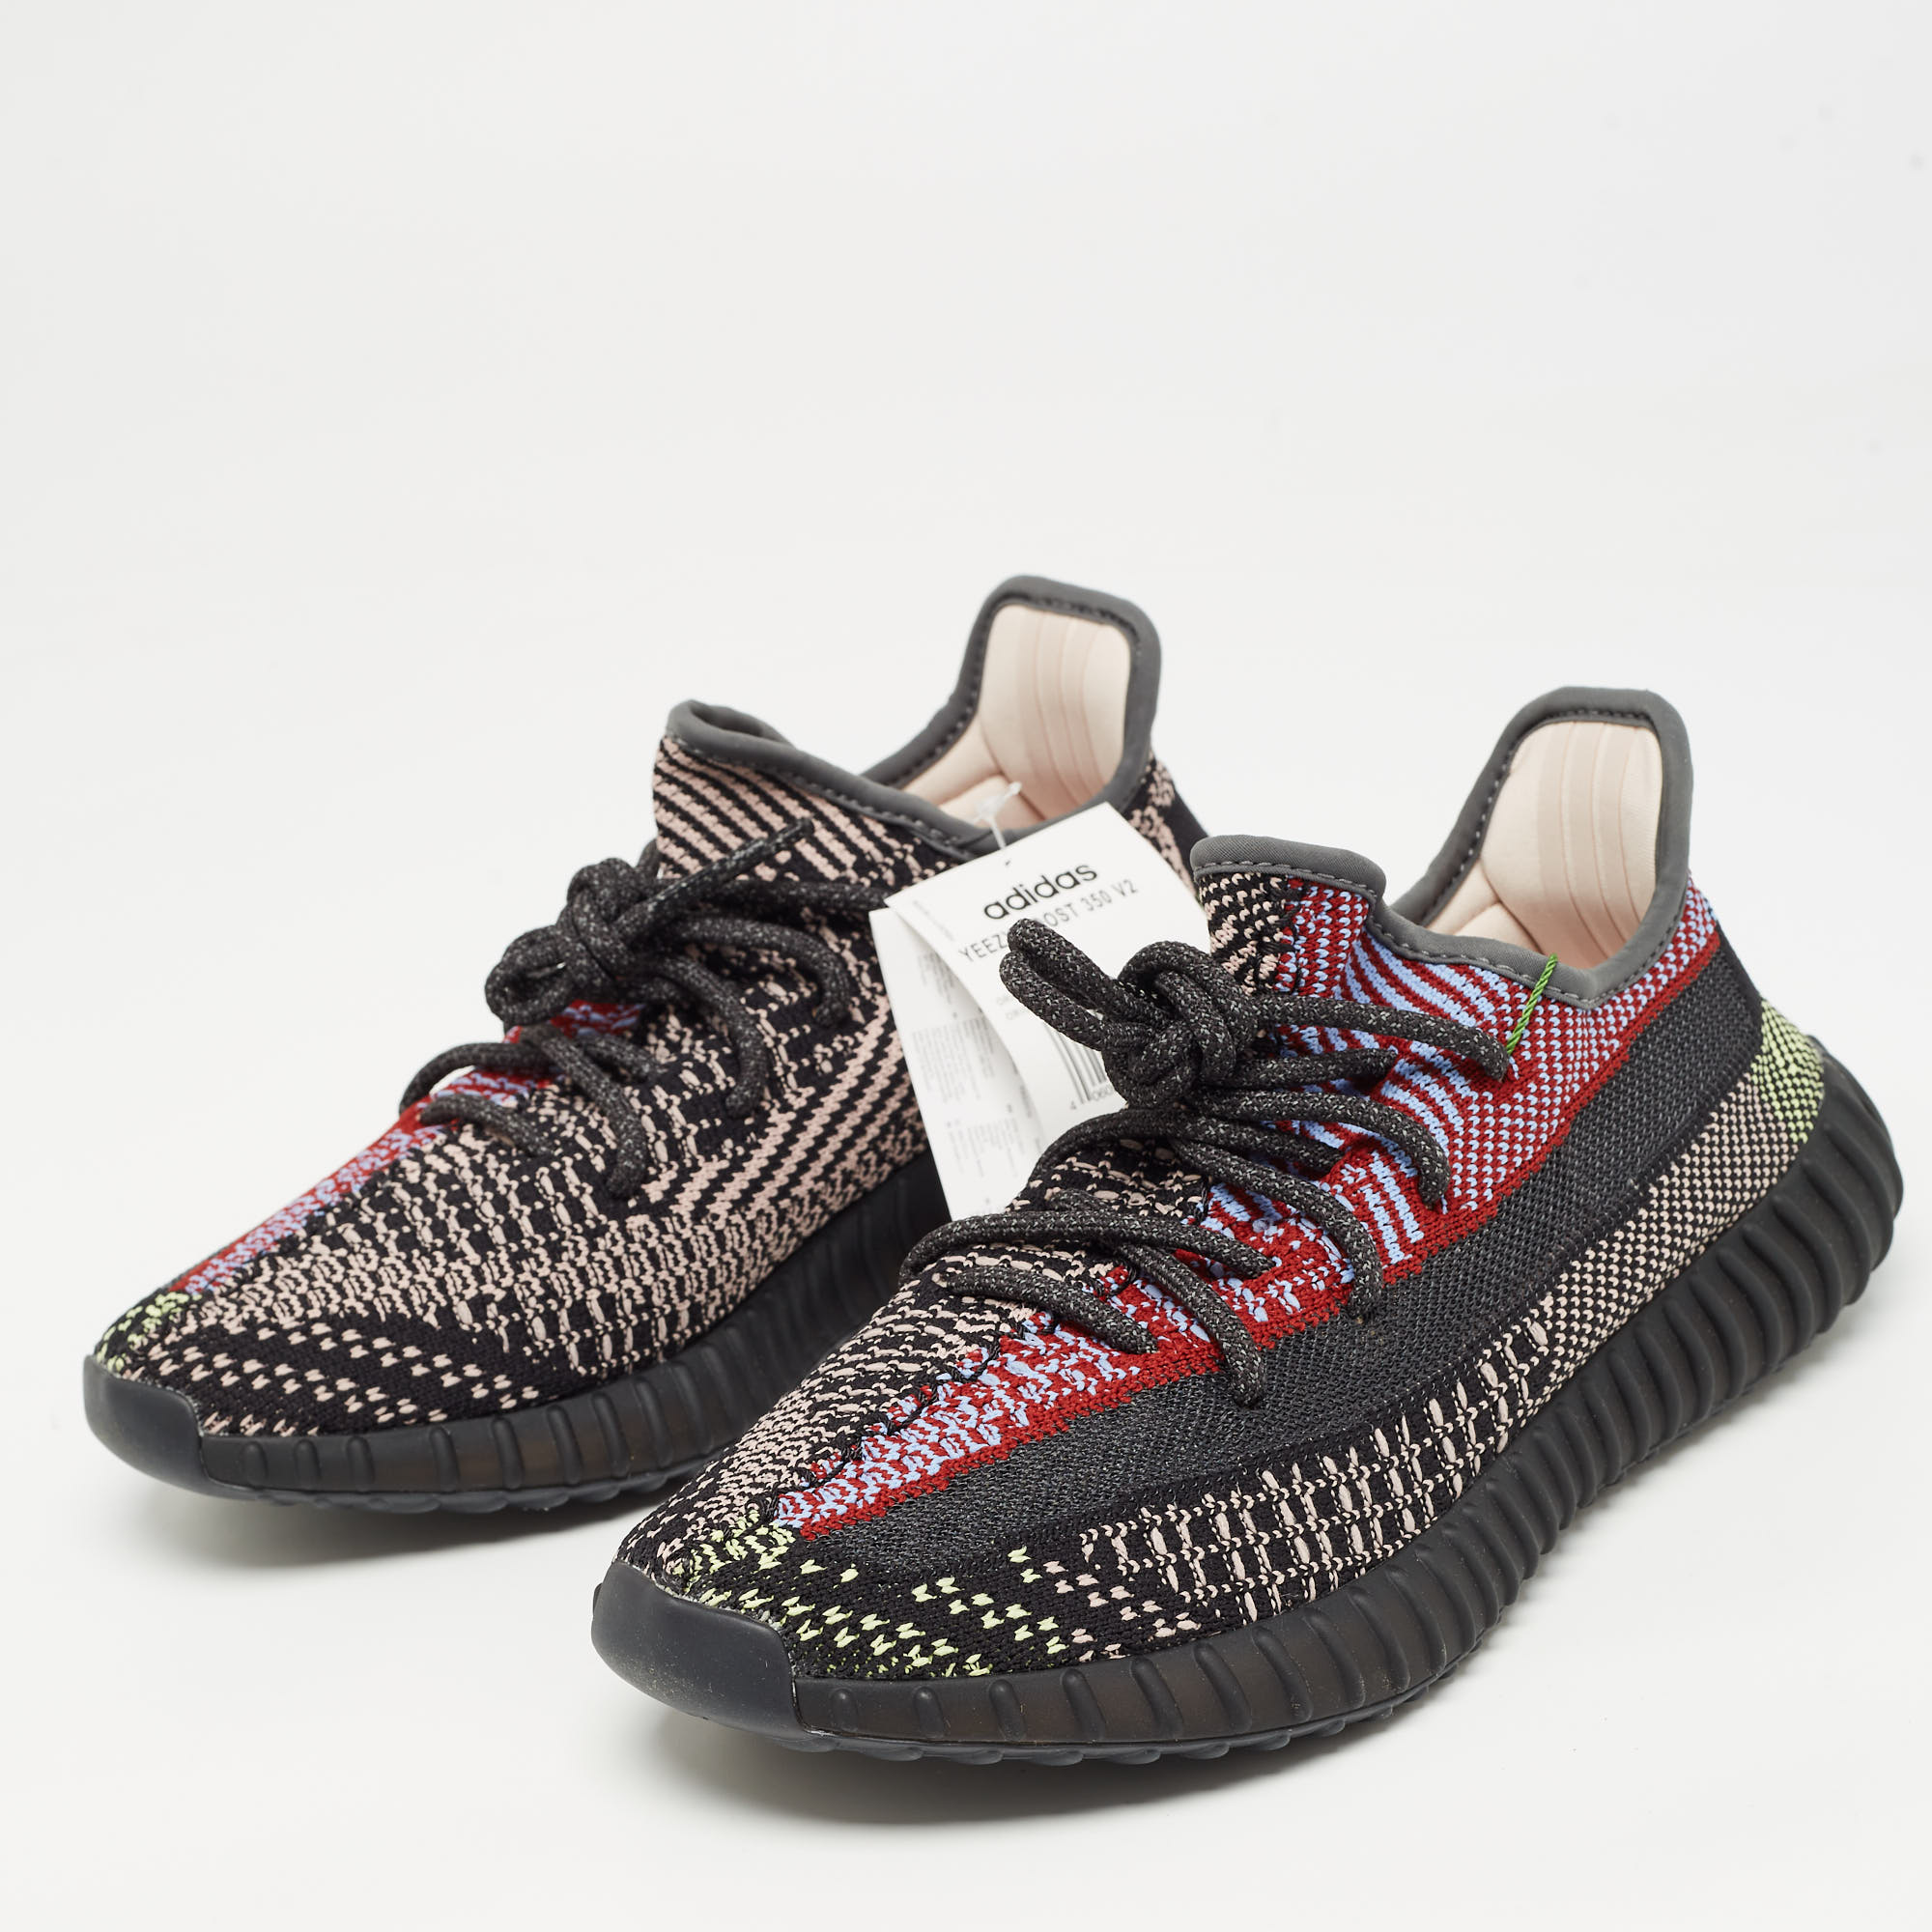 

Yeezy x Adidas Multicolor Knit Fabric Boost 350 V2 Yecheil (Non-Reflective) Sneakers Size 40 2/3